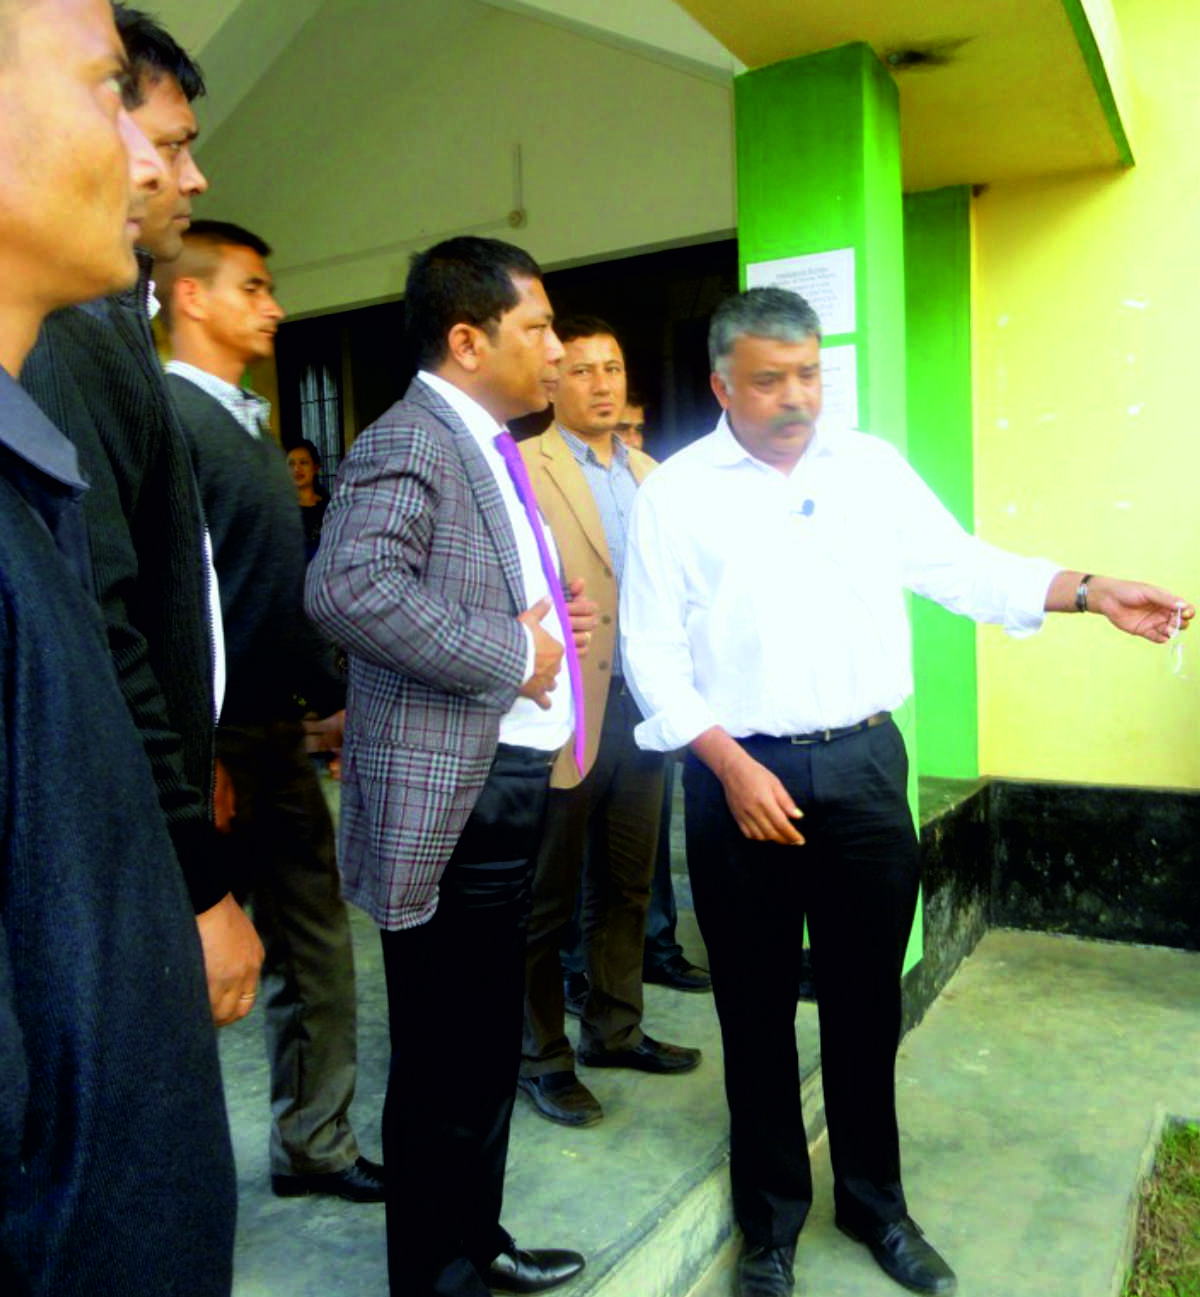 Our CEO explaining the benefits of Organic Farming to the former Chief Minister of Meghalaya Mr. Mukul Sangma